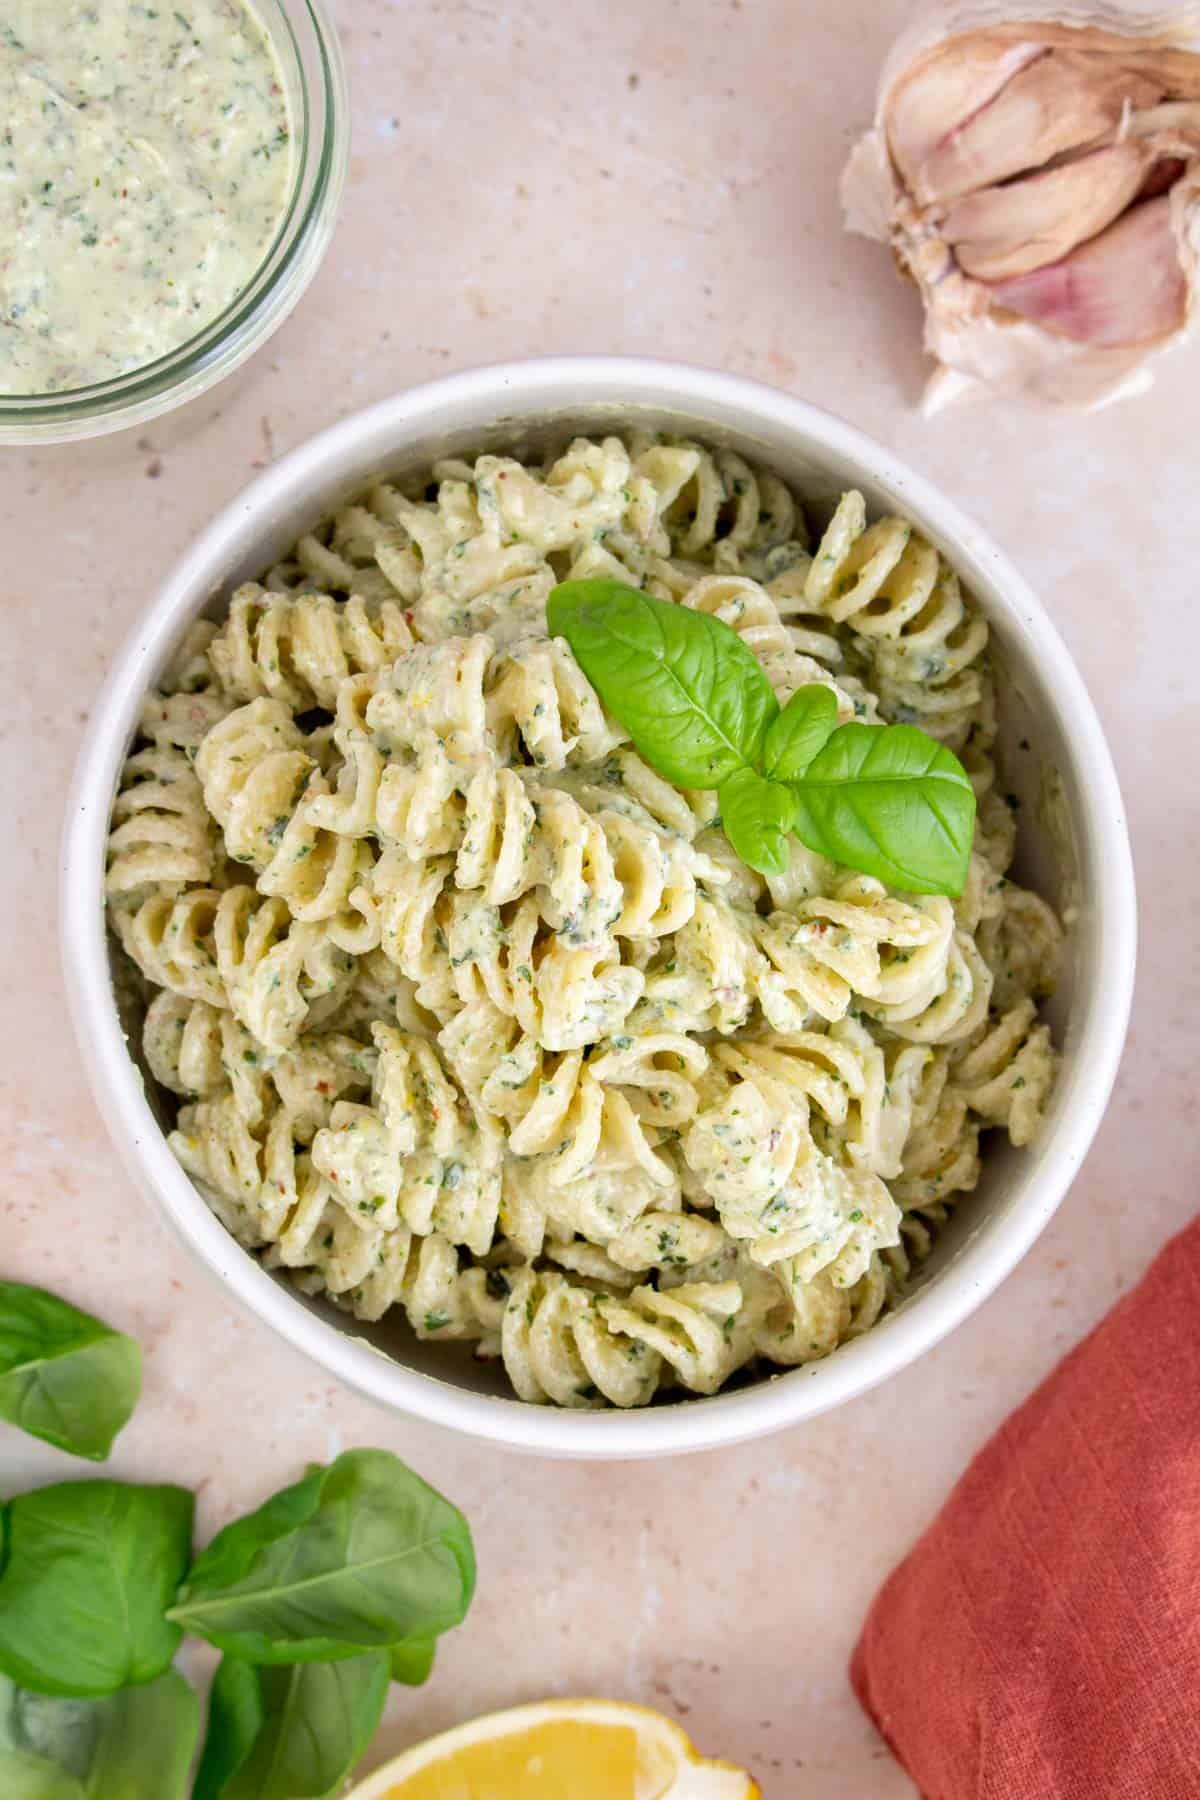 A bowl of pasta coated in ricotta pesto.